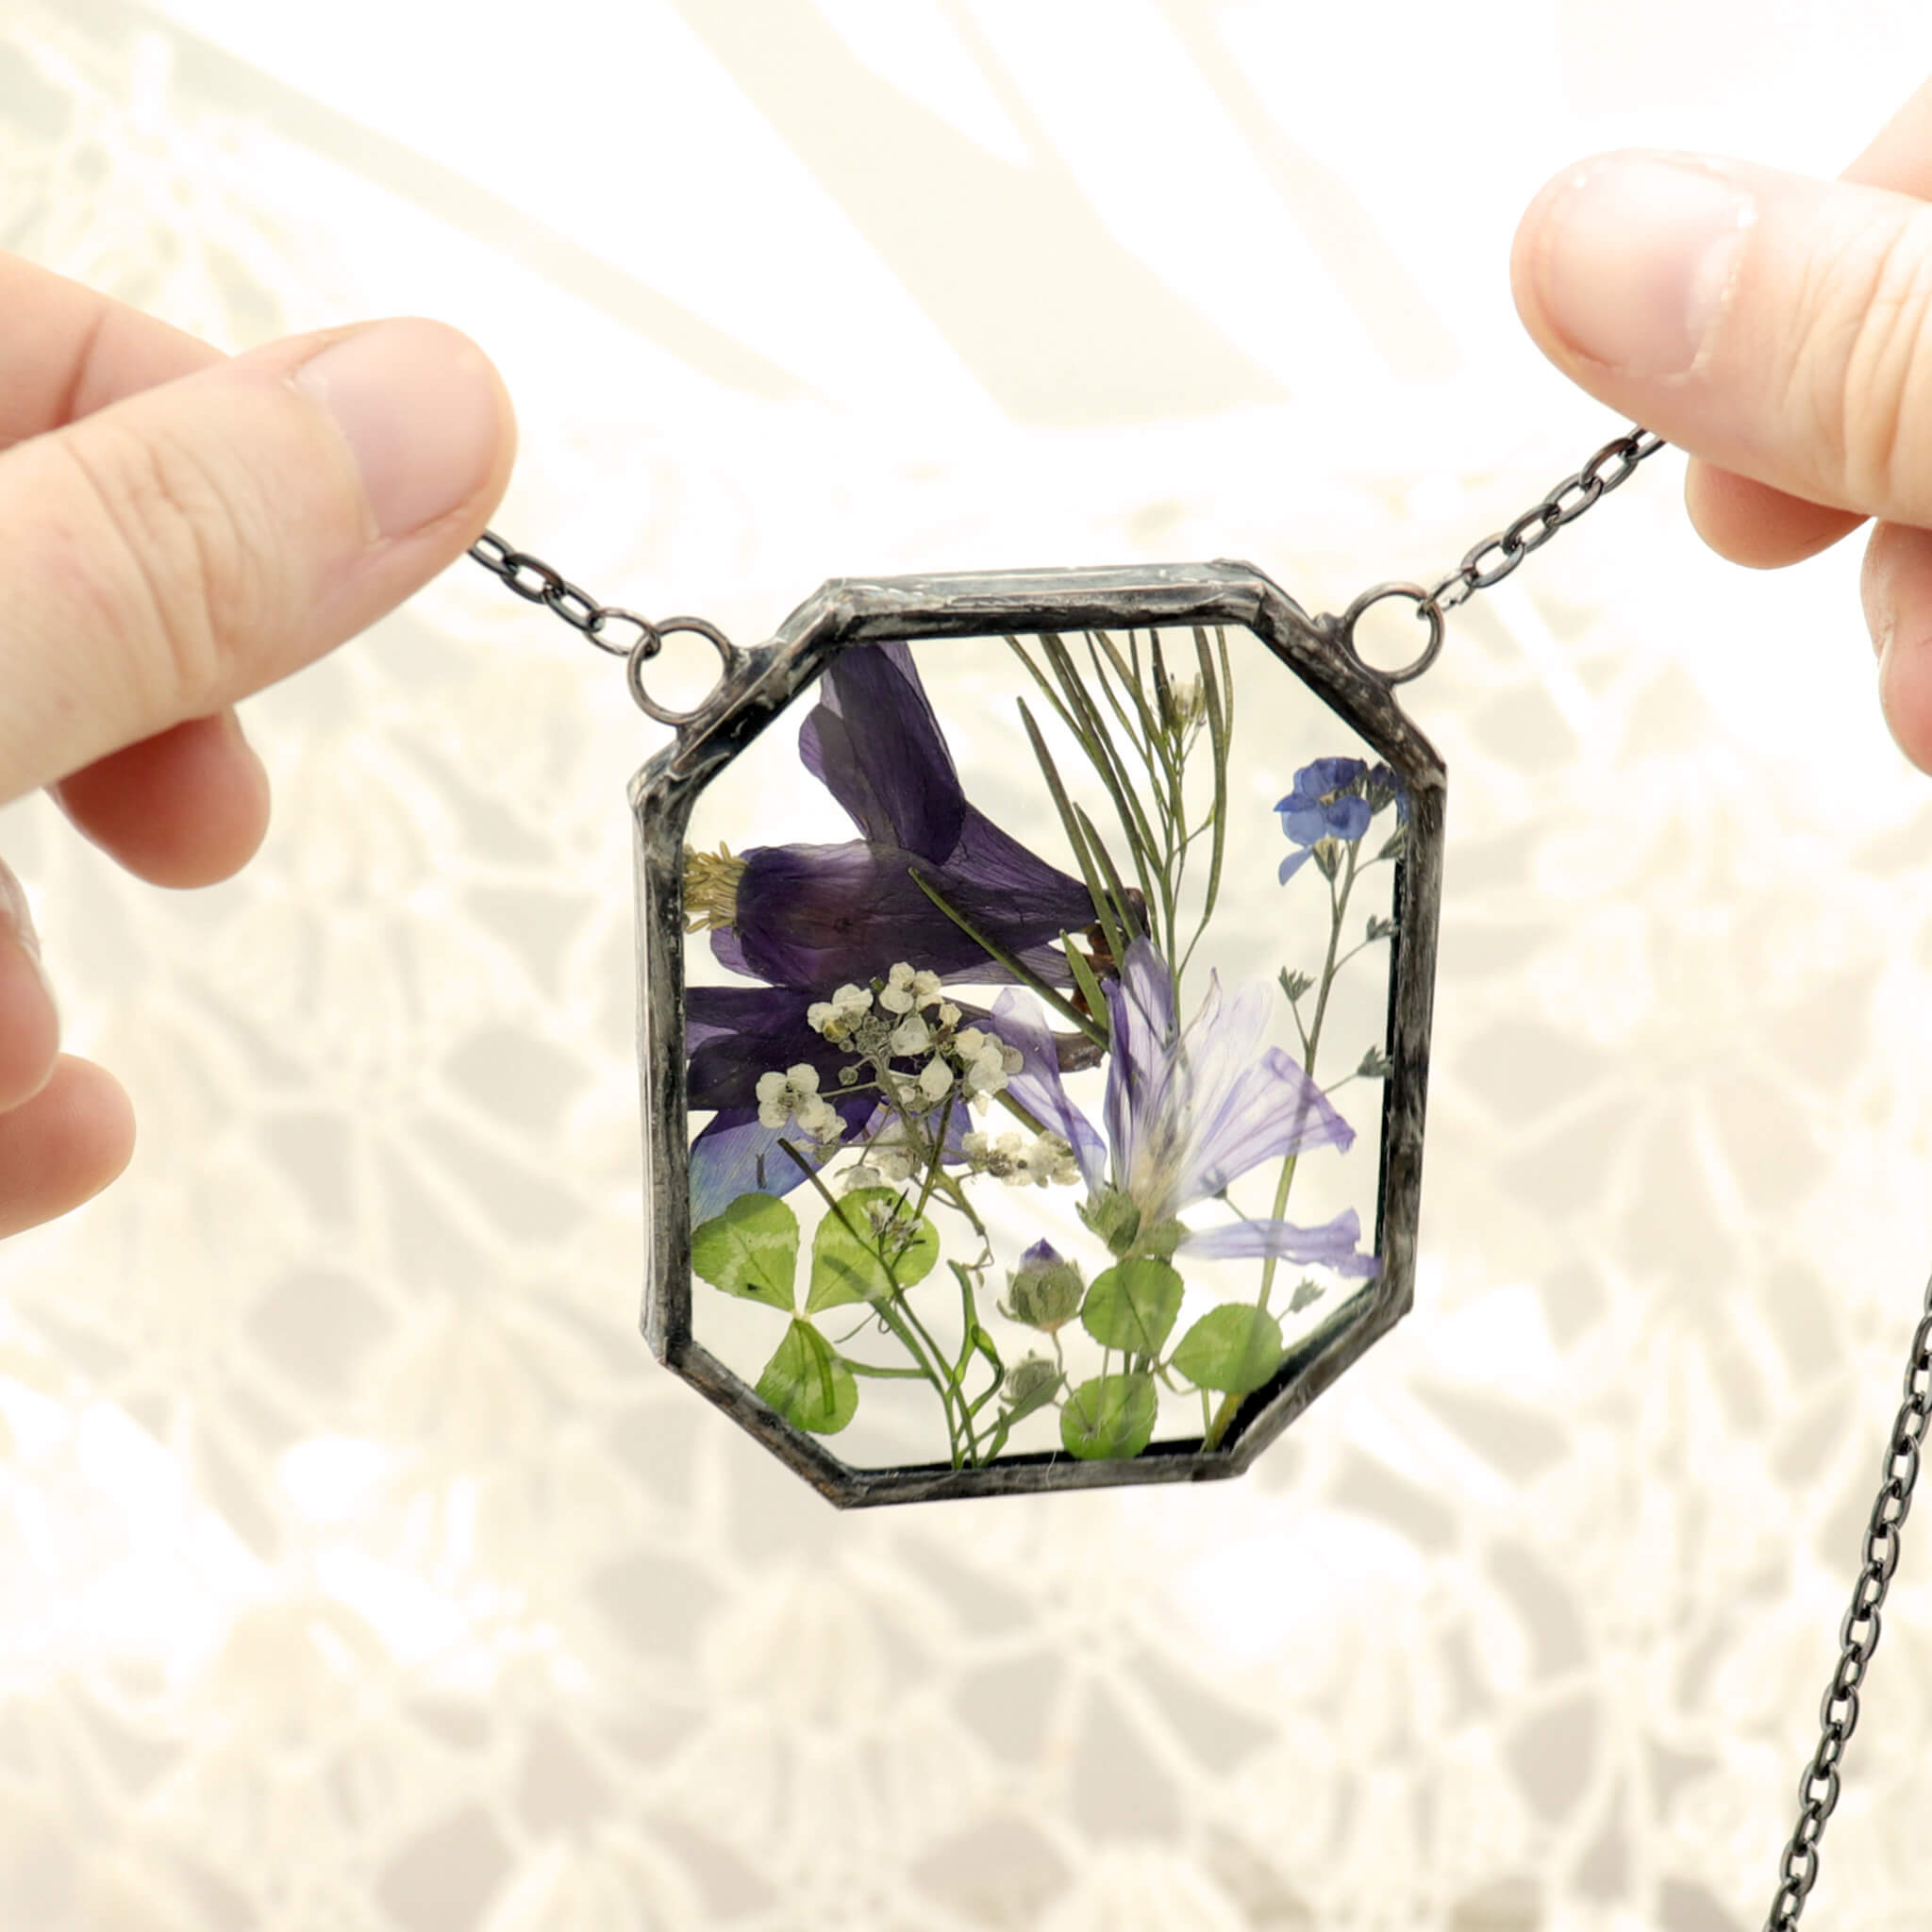 dark indigo flowers and greenery in glass and solder necklace being held in hands